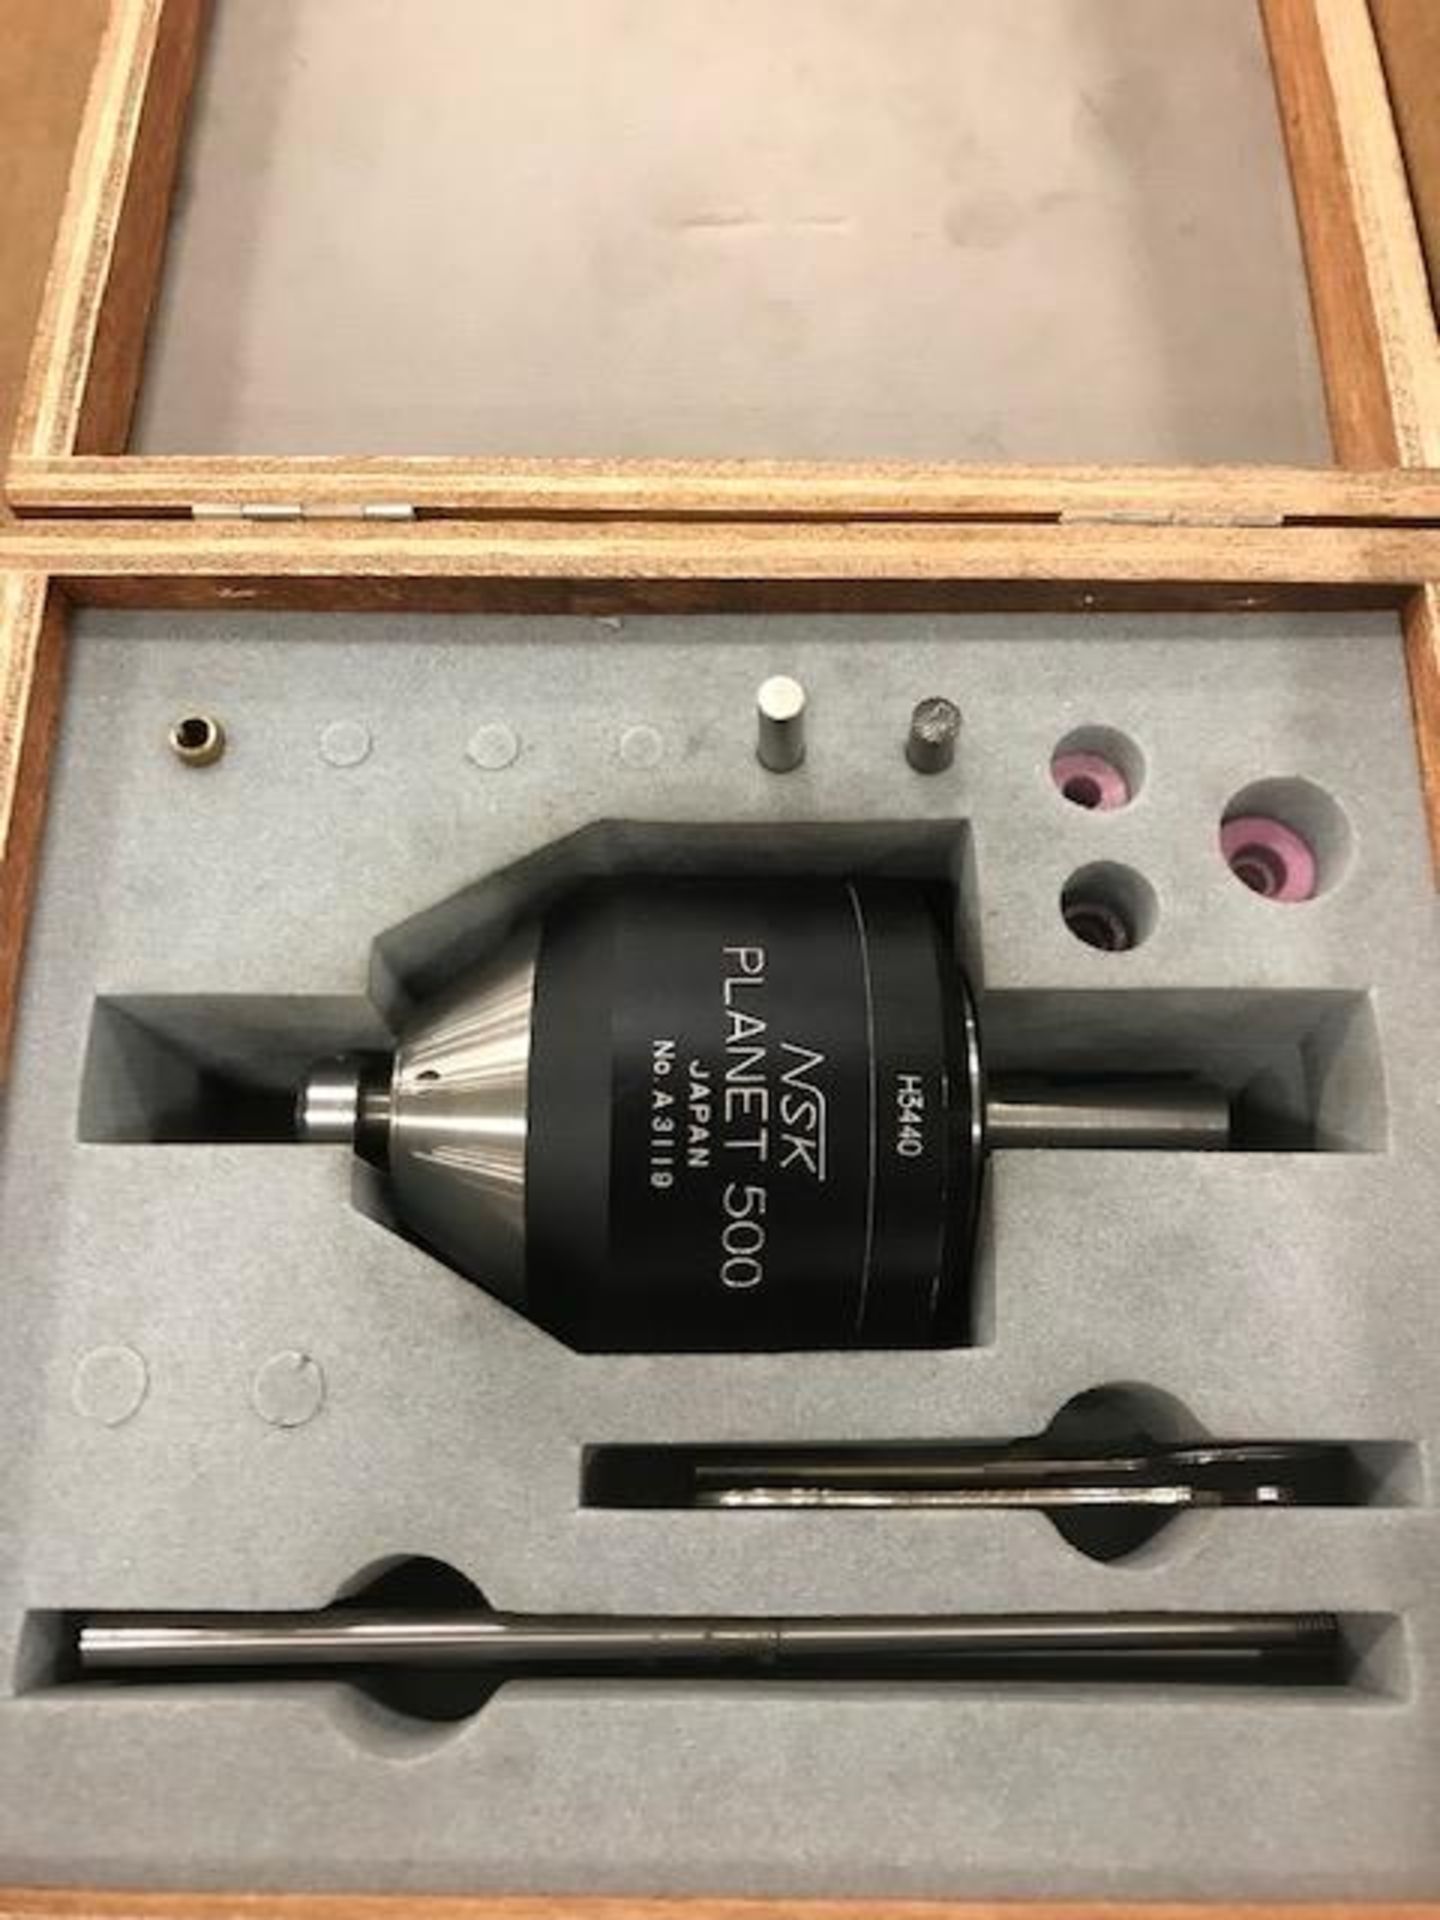 NSK H3440 Precision Jig Grinding Attachment with 3/4" Arbor